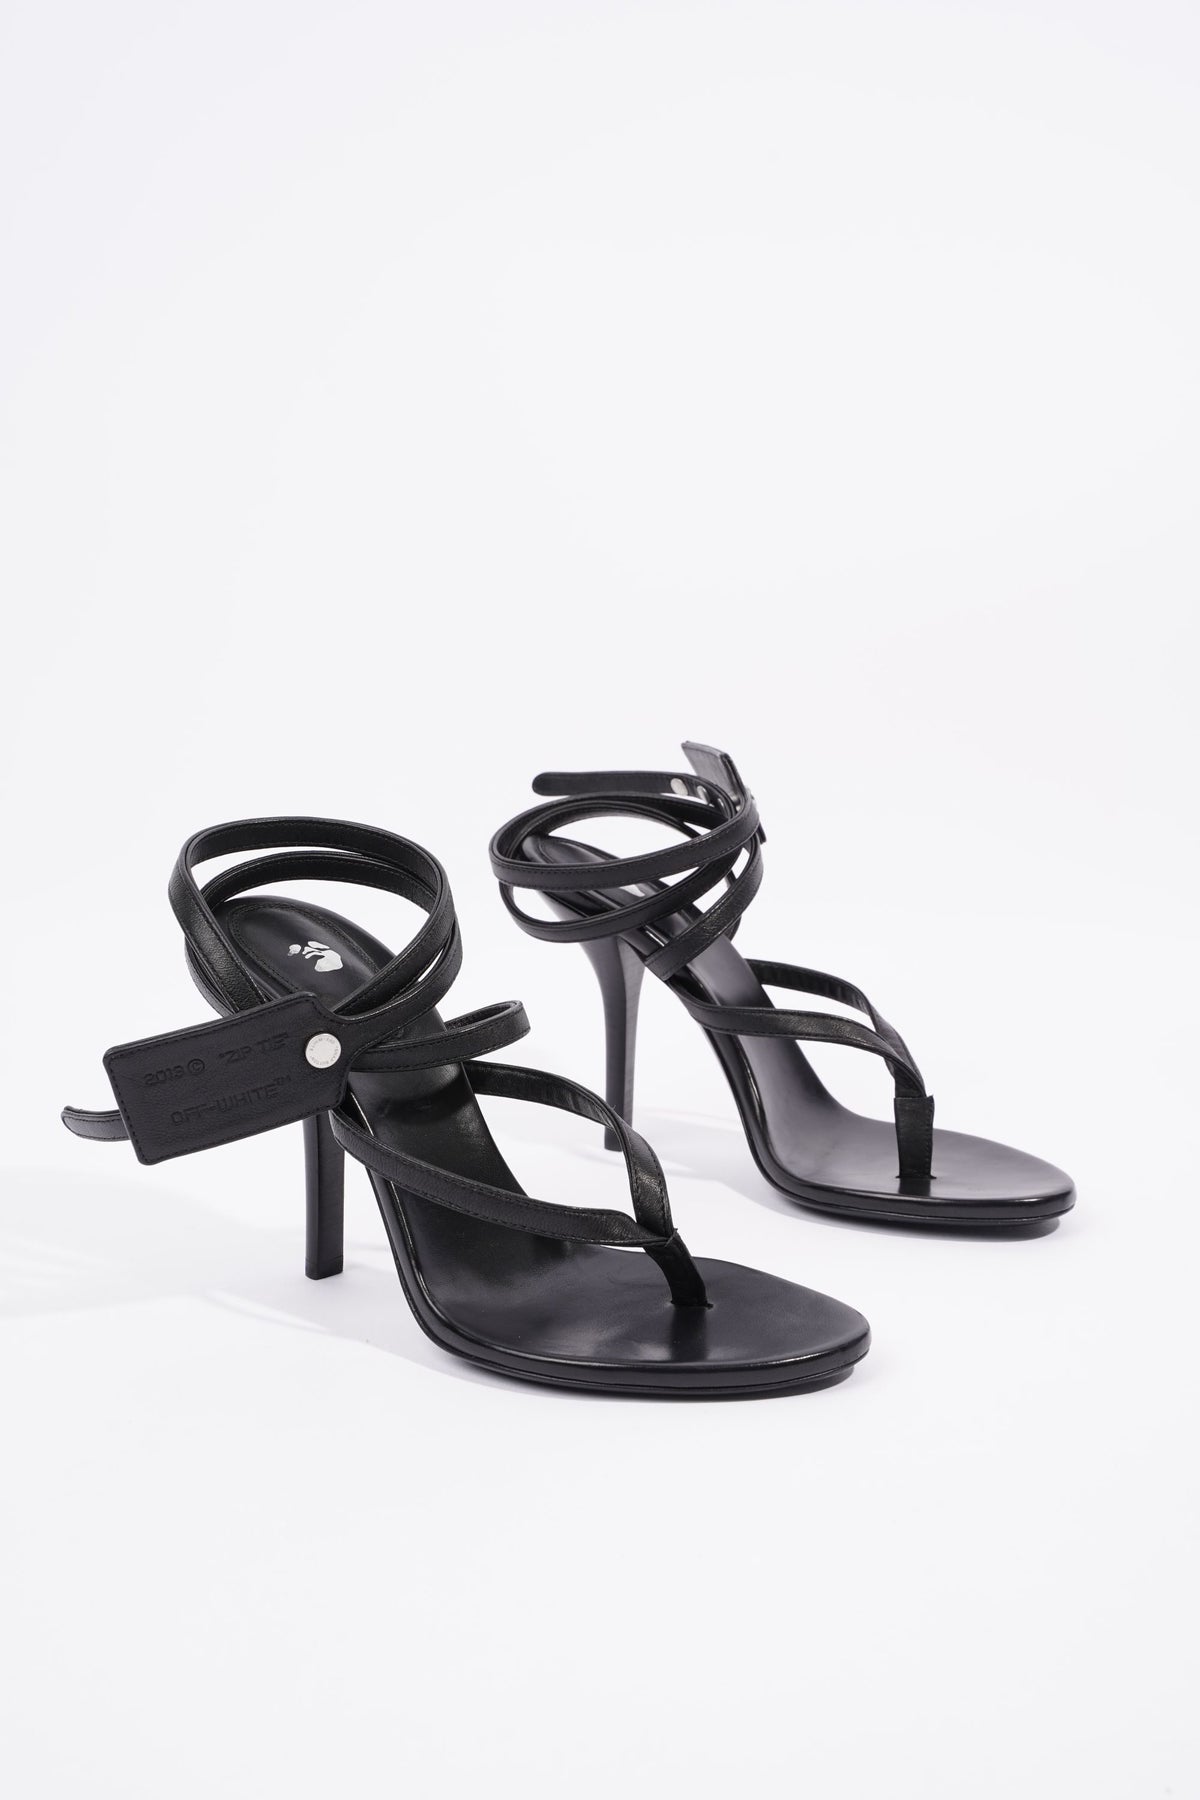 Black Ankle Tag Flats - GBNY